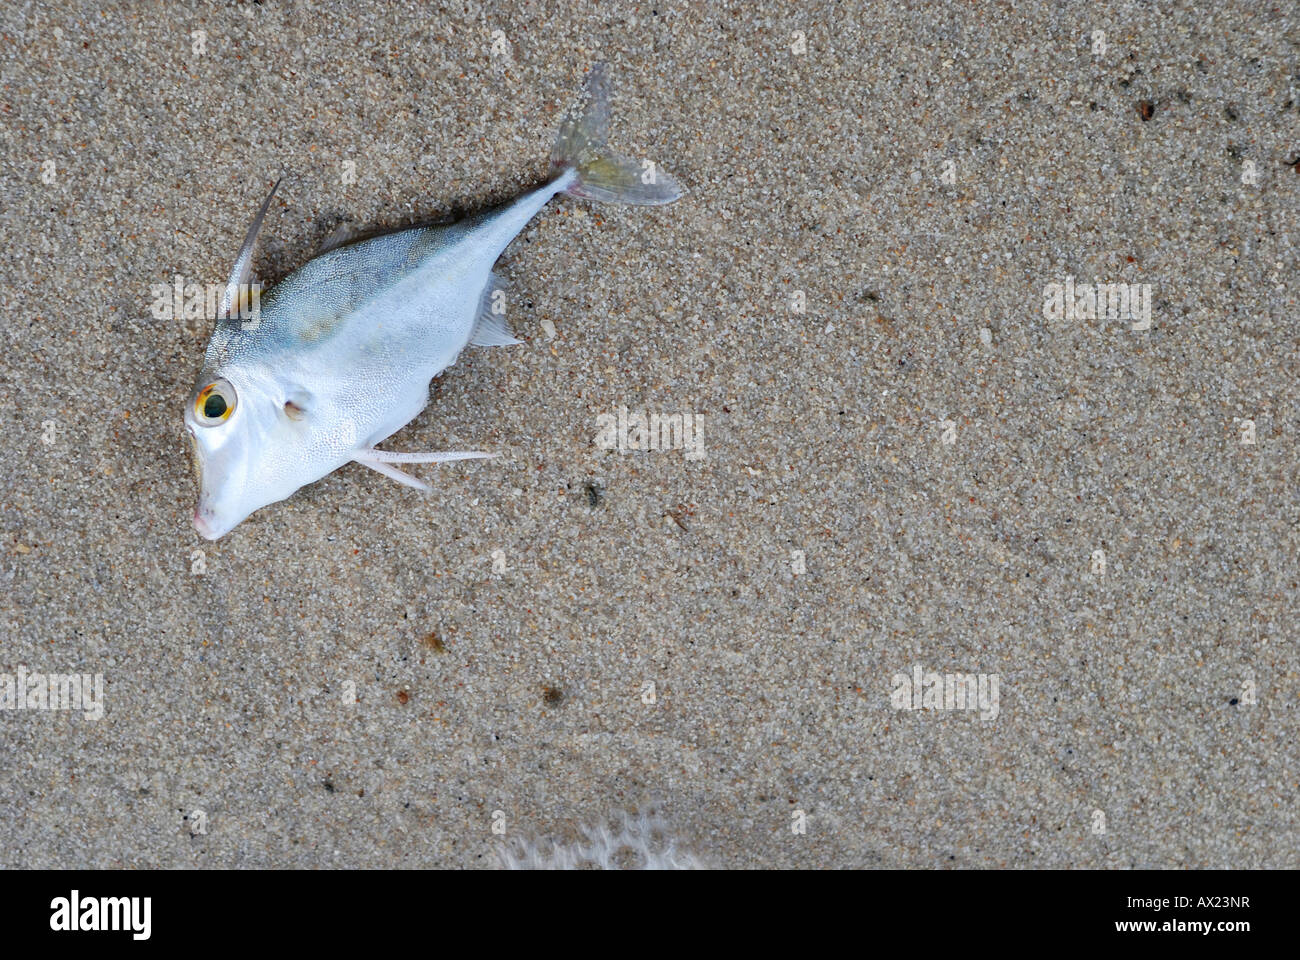 Dead fish at the beach Stock Photo